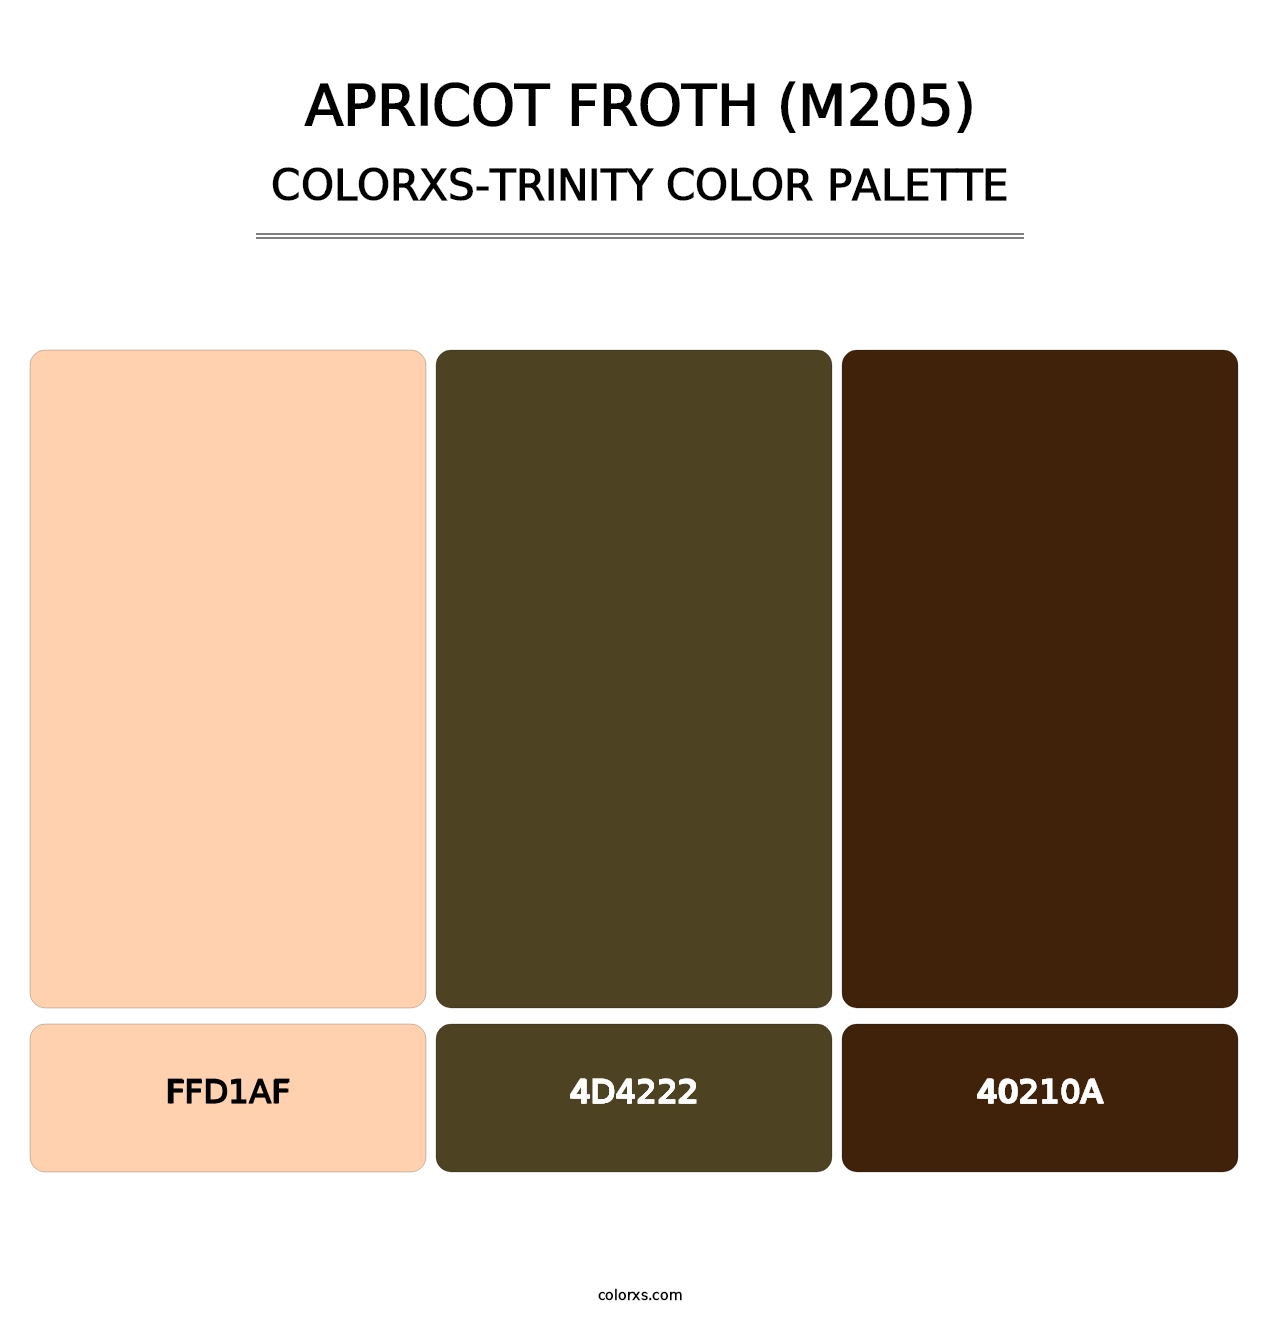 Apricot Froth (M205) - Colorxs Trinity Palette